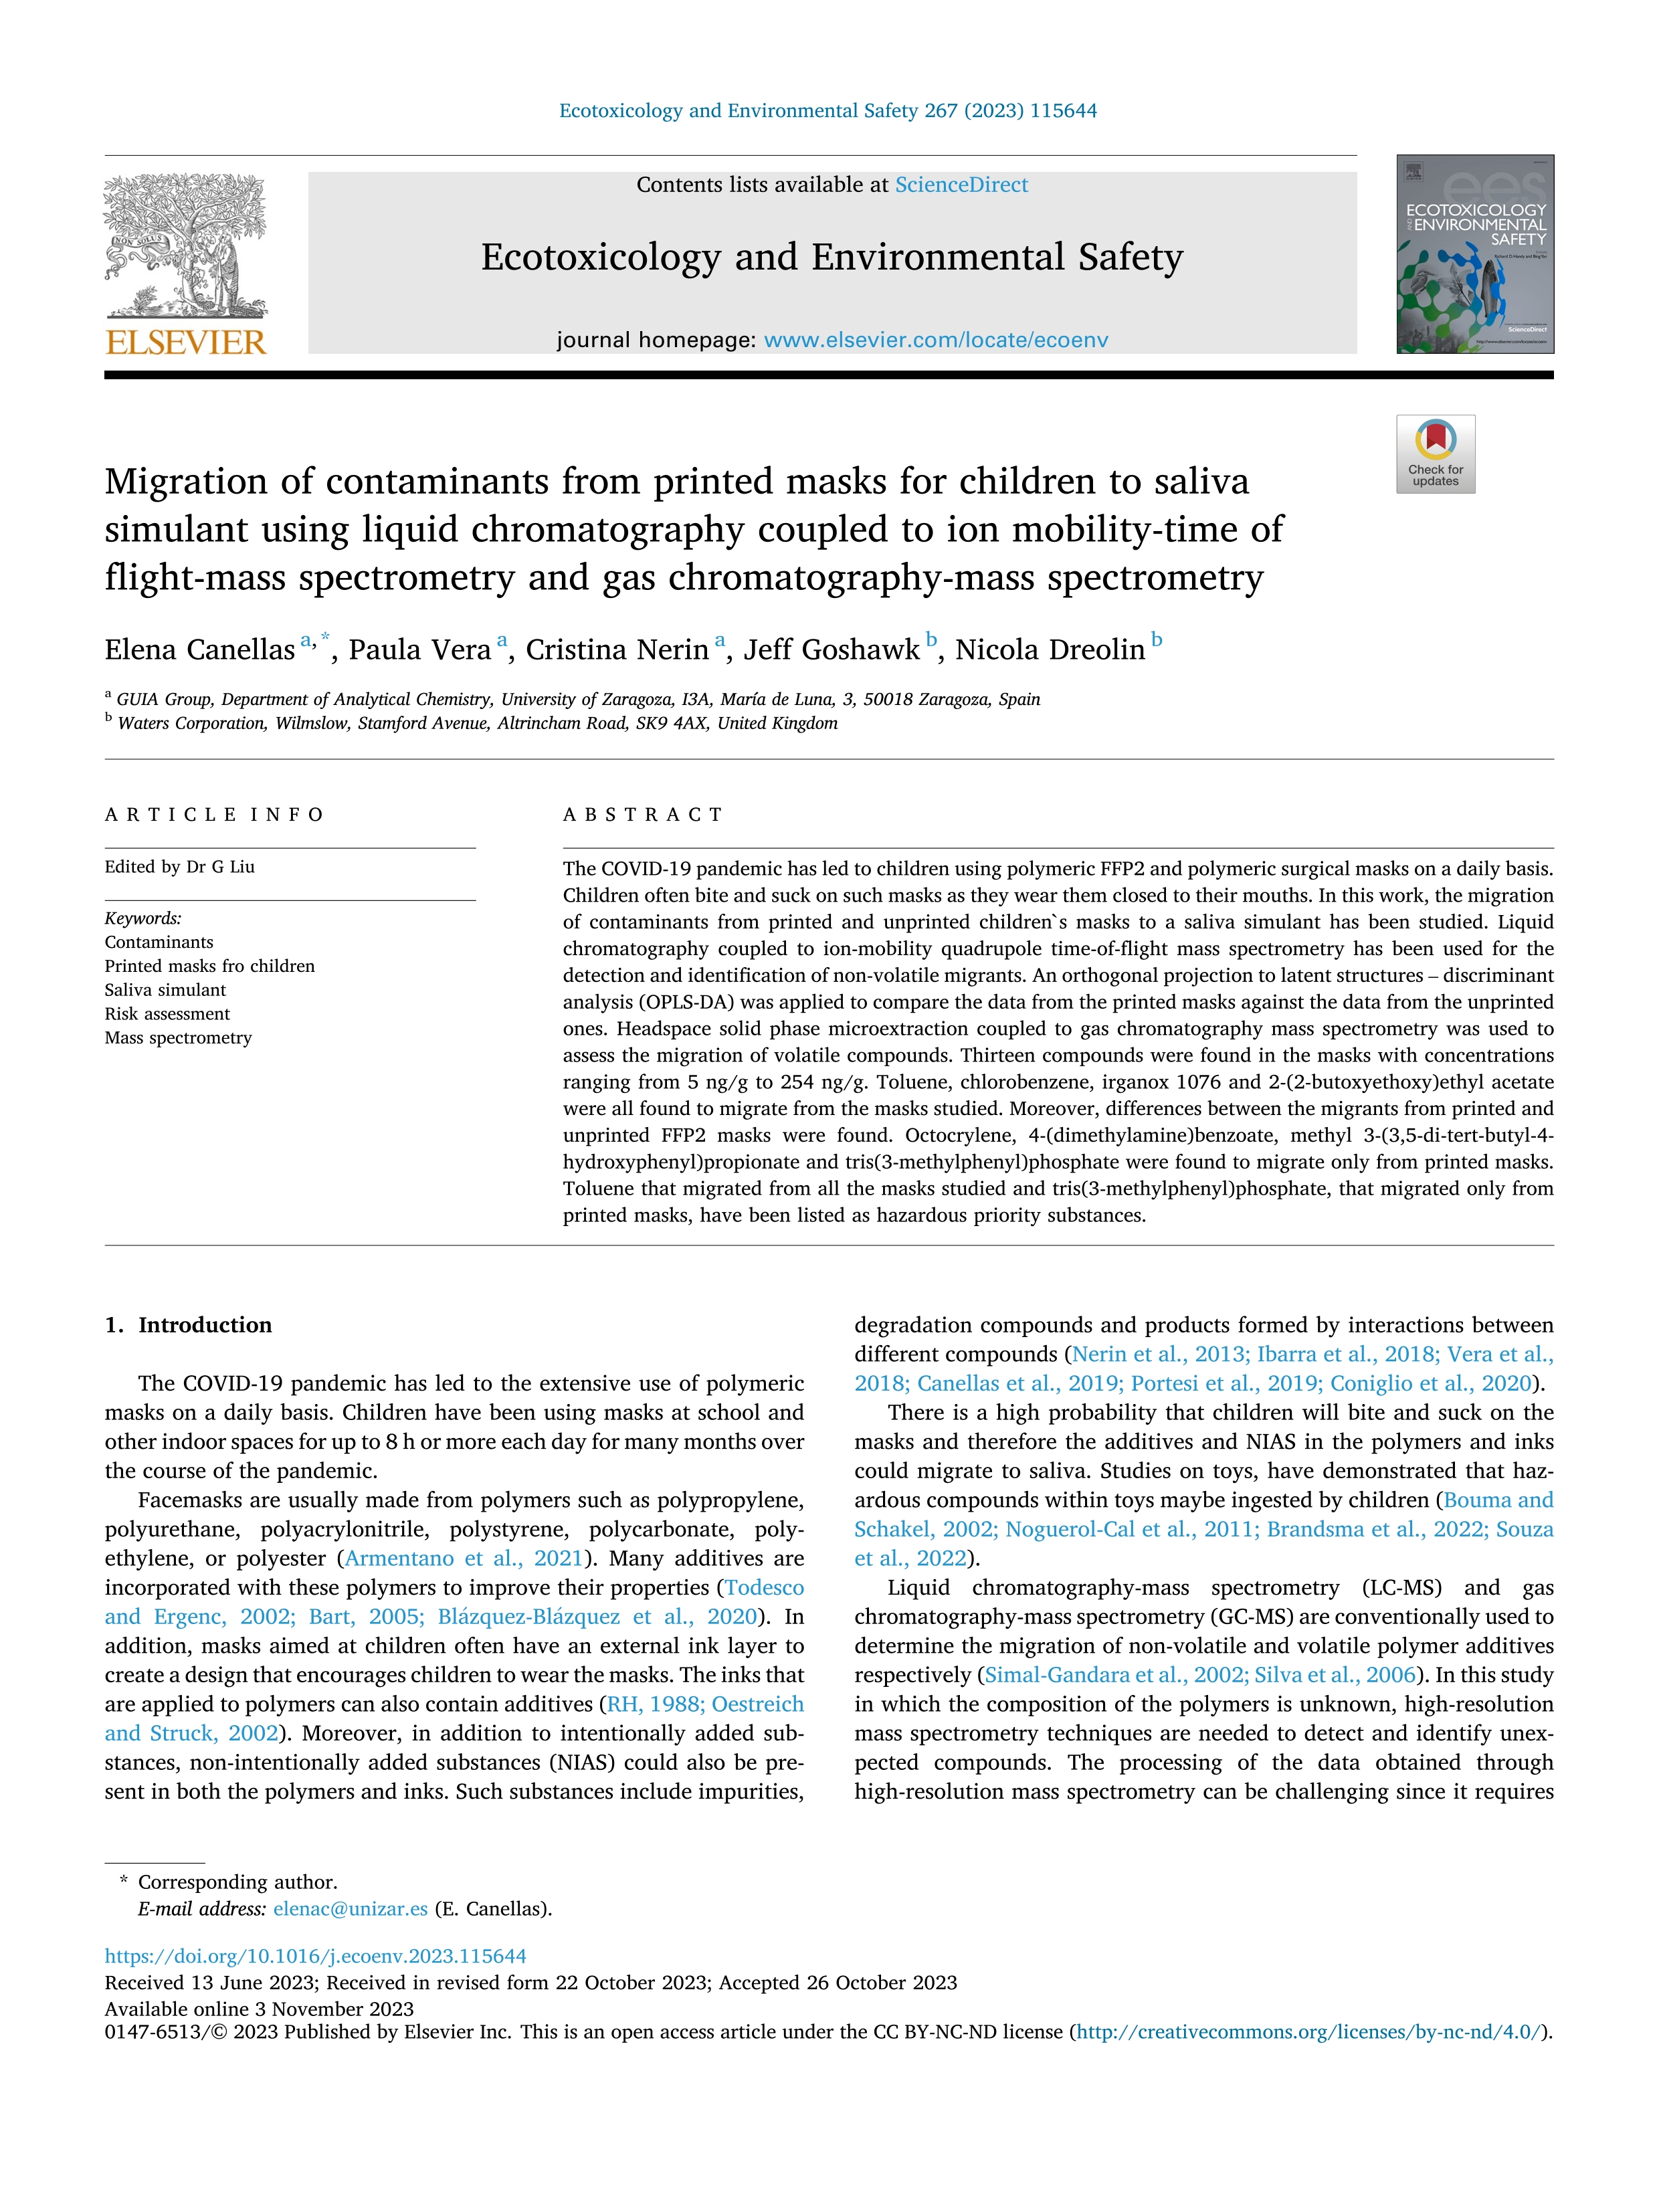 Migration of contaminants from printed masks for children to saliva simulant using liquid chromatography coupled to ion mobility-time of flight-mass spectrometry and gas chromatography-mass spectrometry